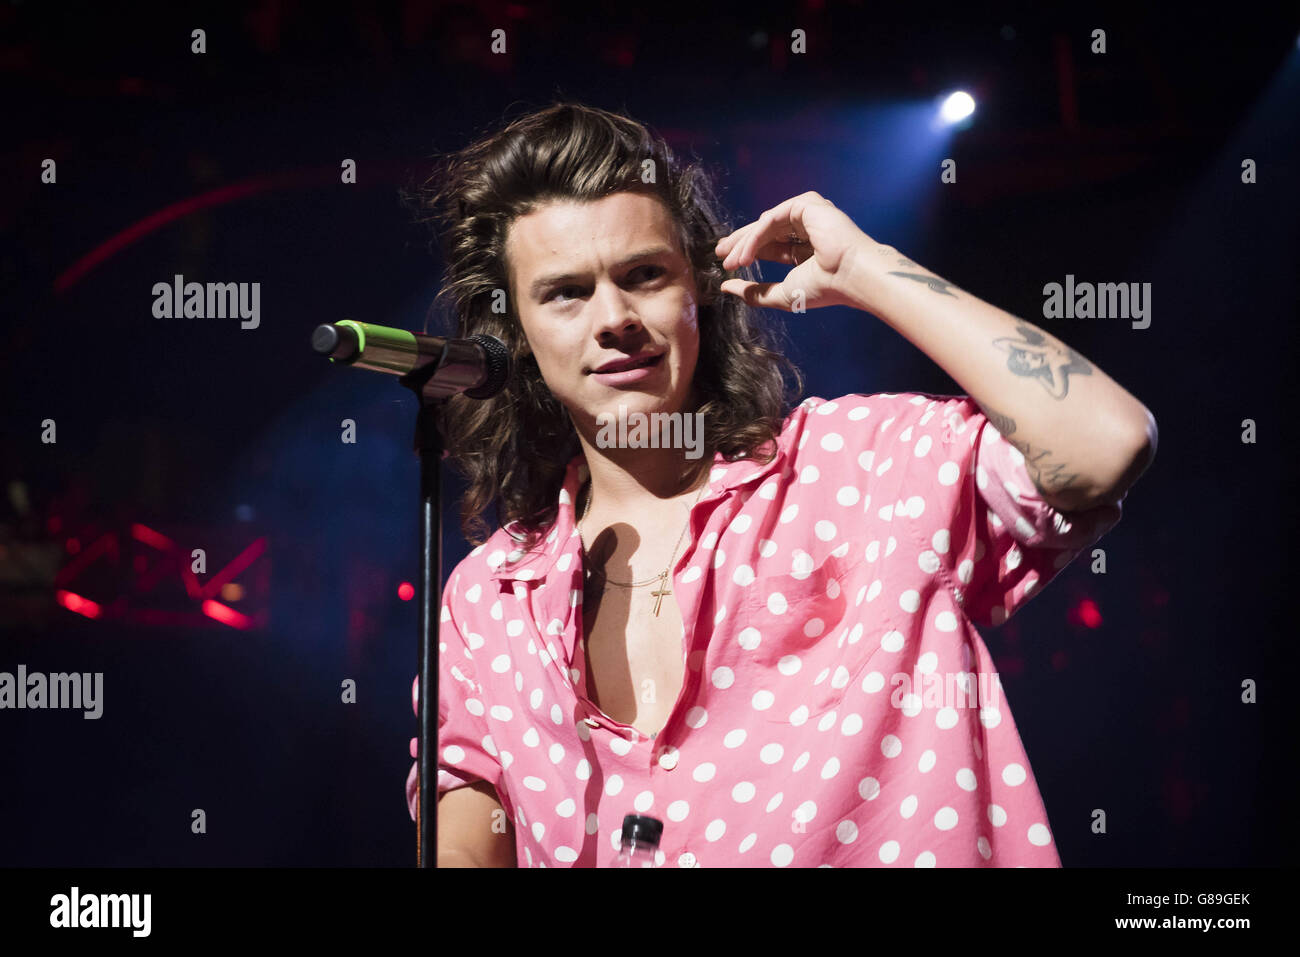 Harry Styles of One Direction performing at the Apple Music festival at the Roundhouse in Camden, London. Stock Photo